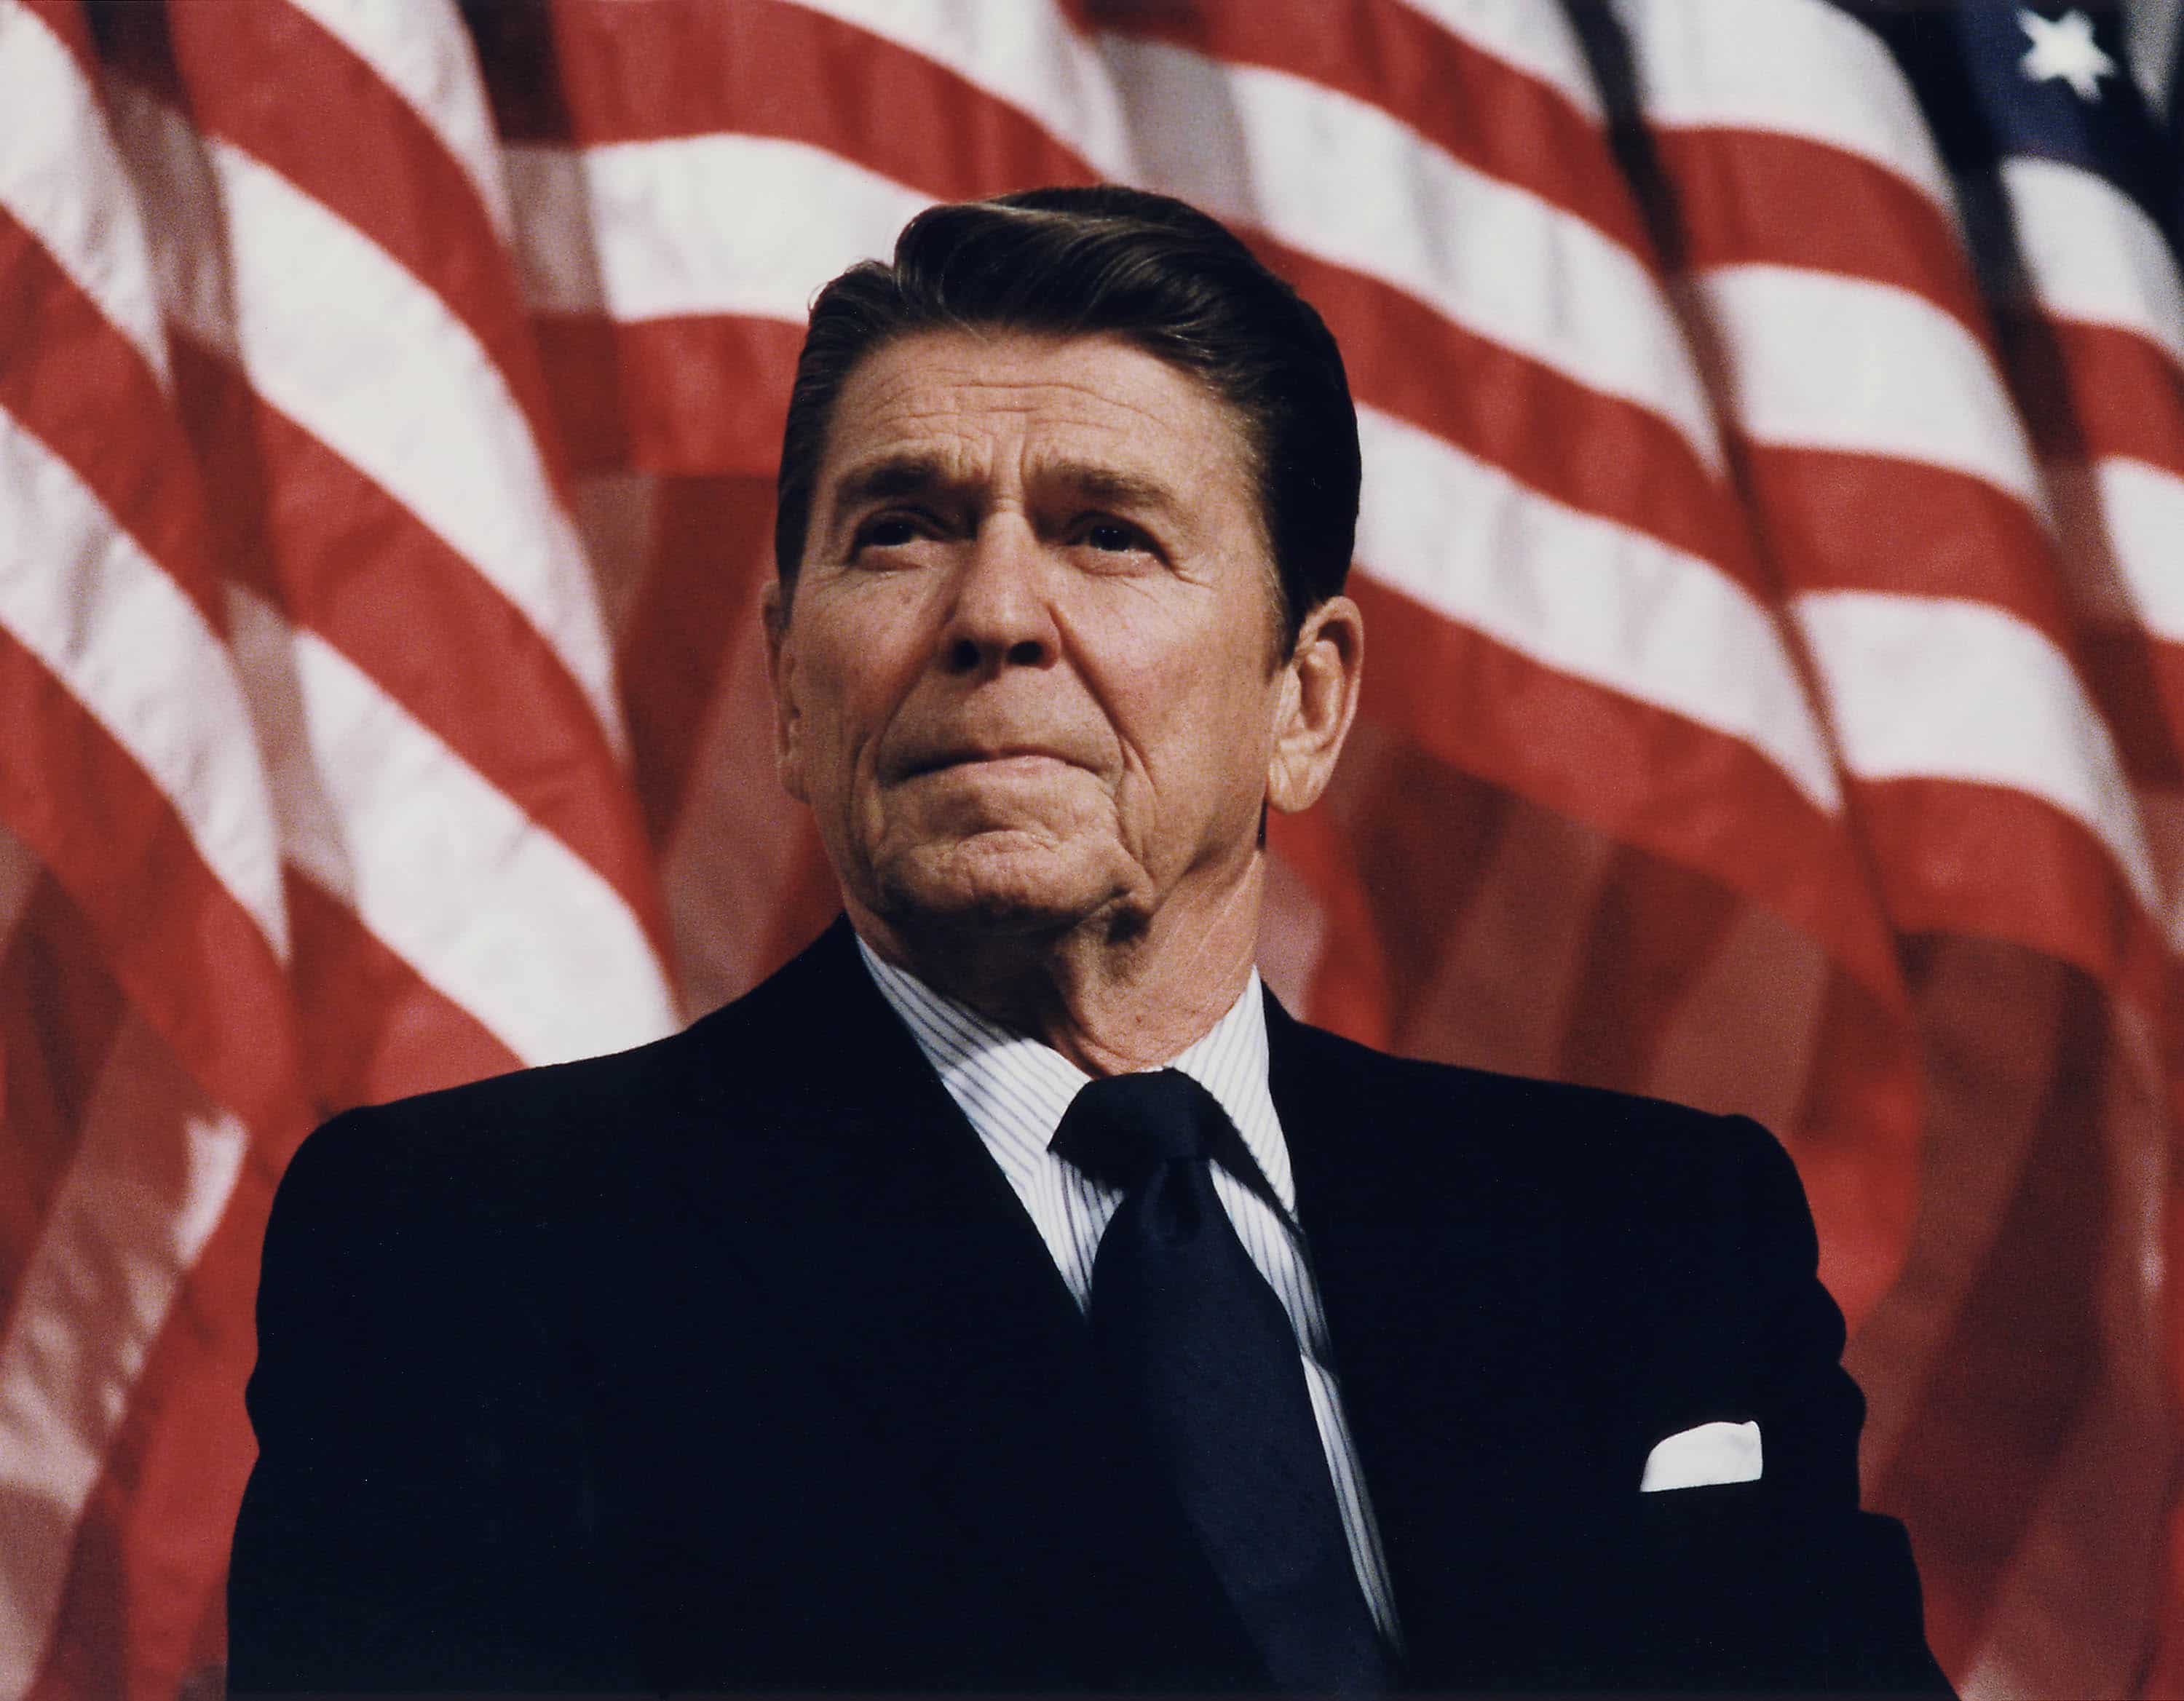 reagan-at-durenberger-rally 25 of the Greatest Self-Made Men in American History